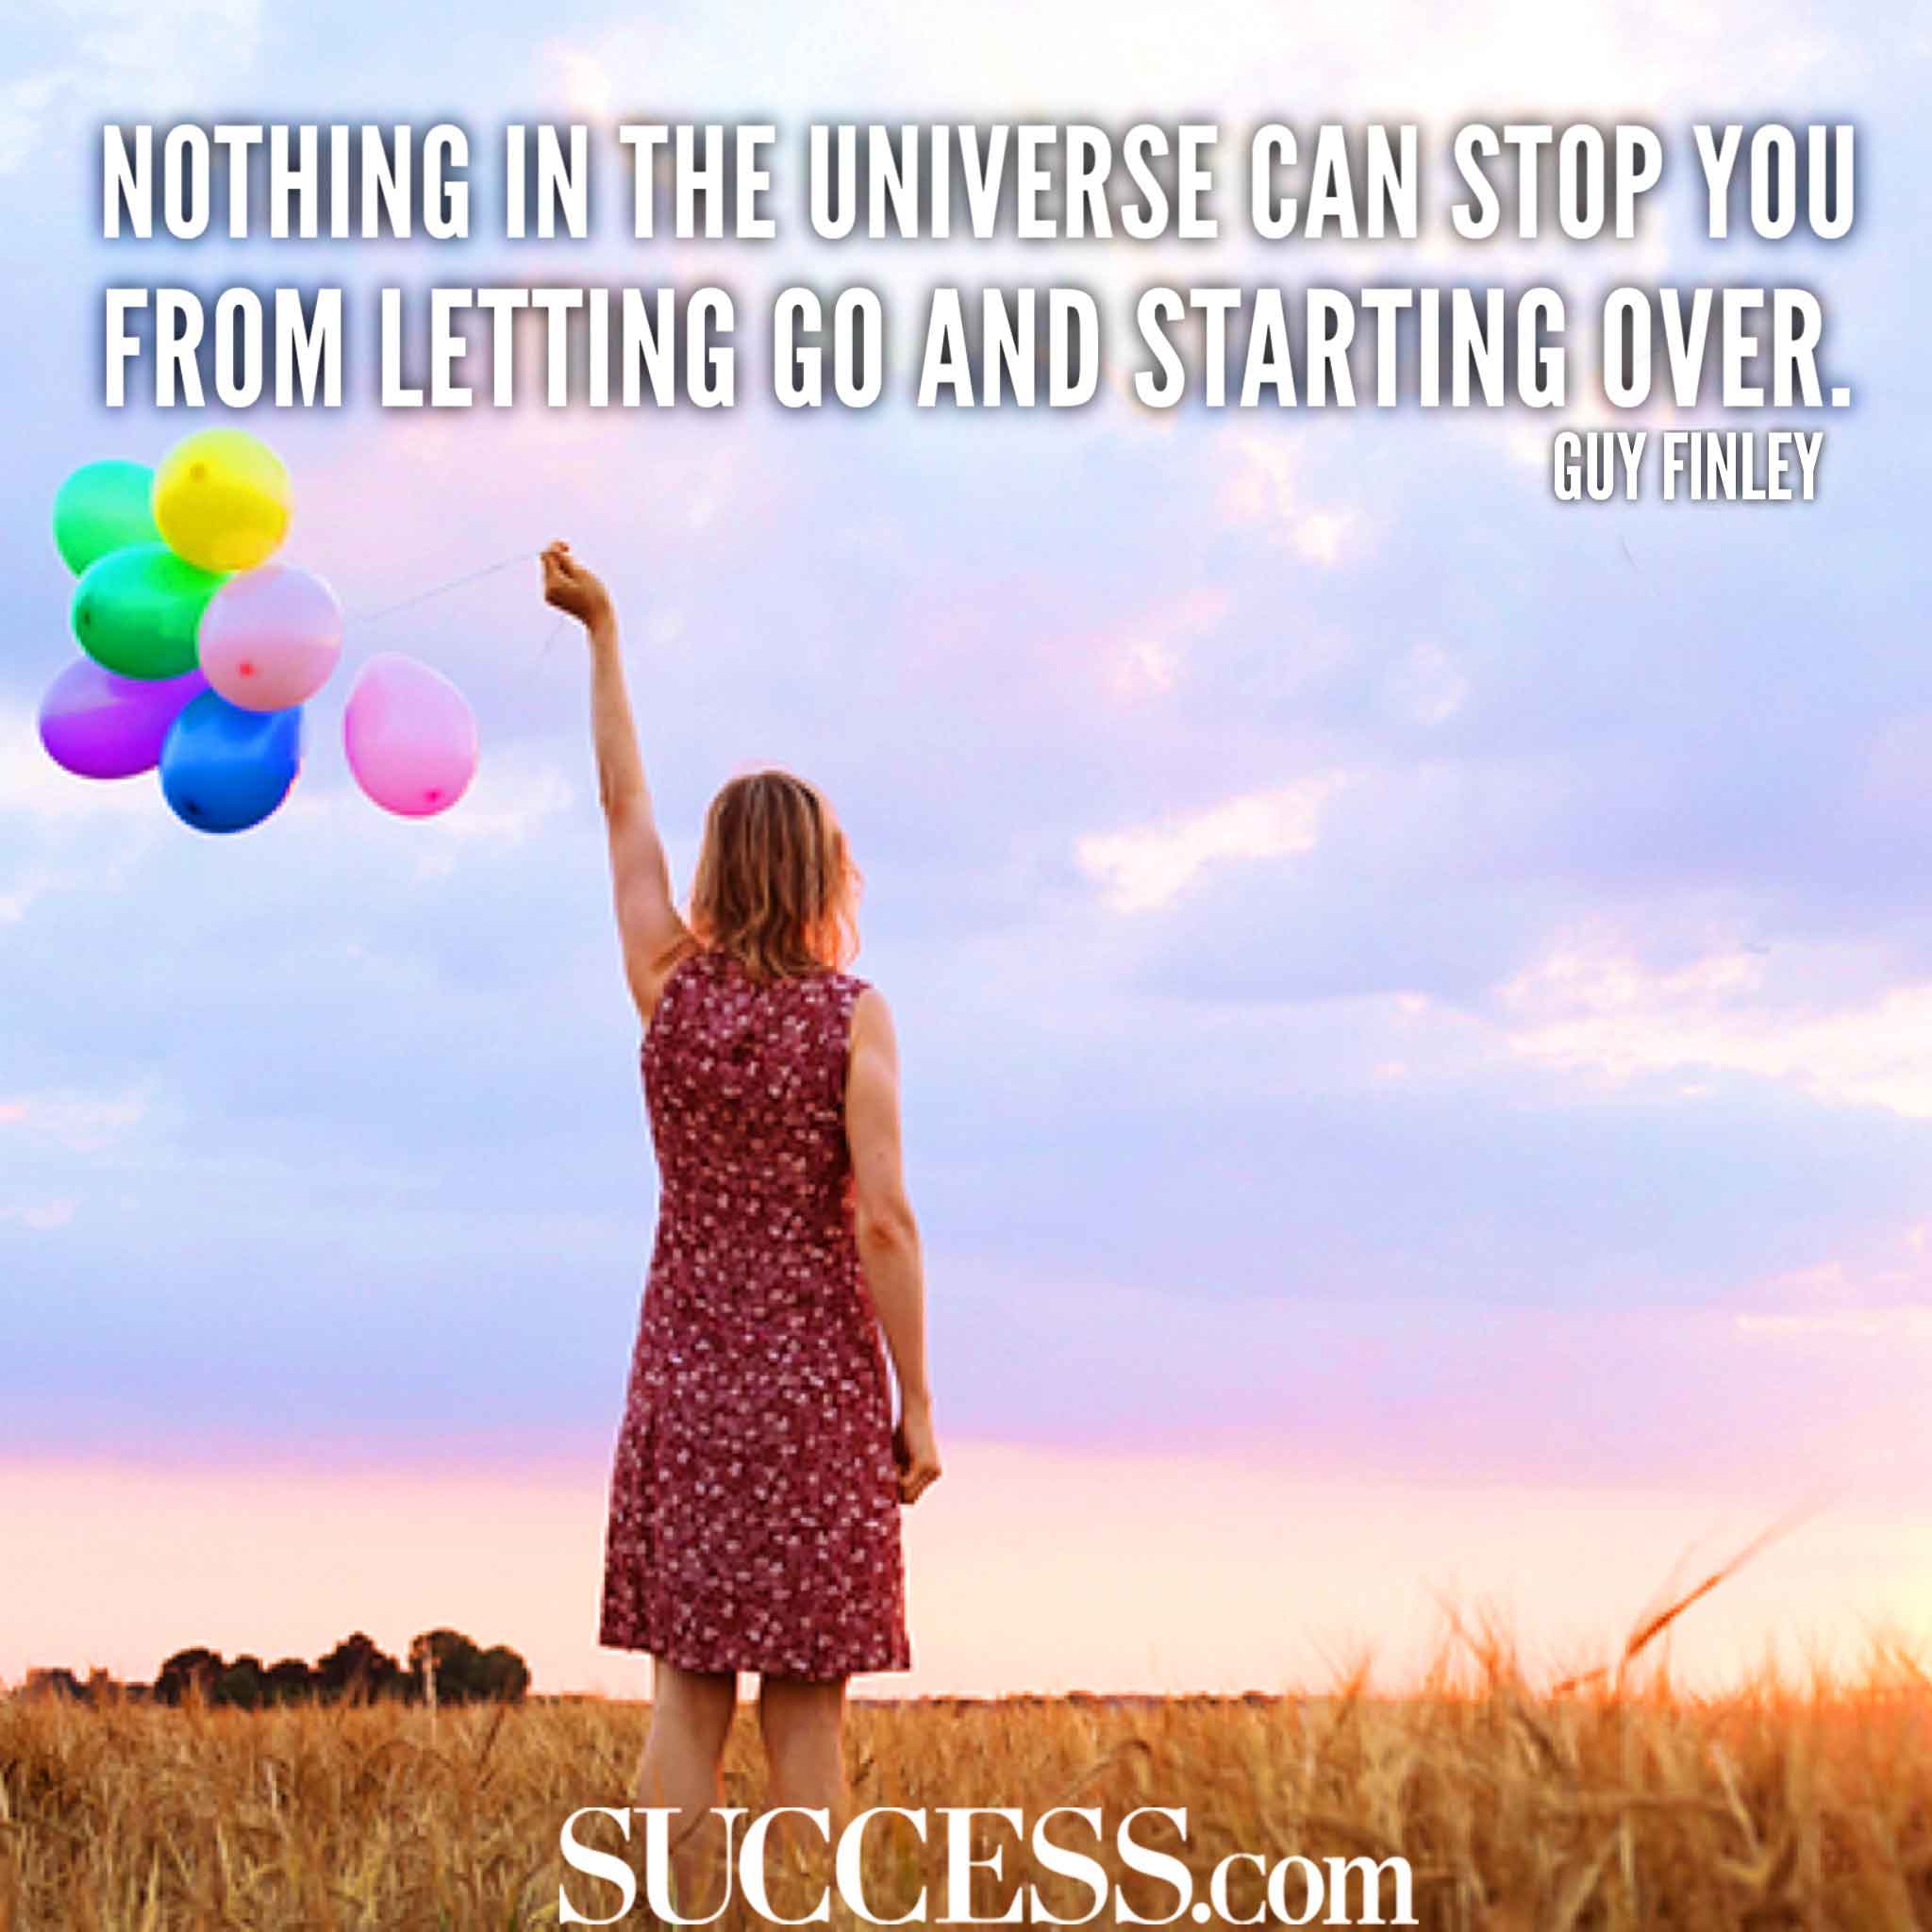 13 Uplifting Quotes About New Beginnings